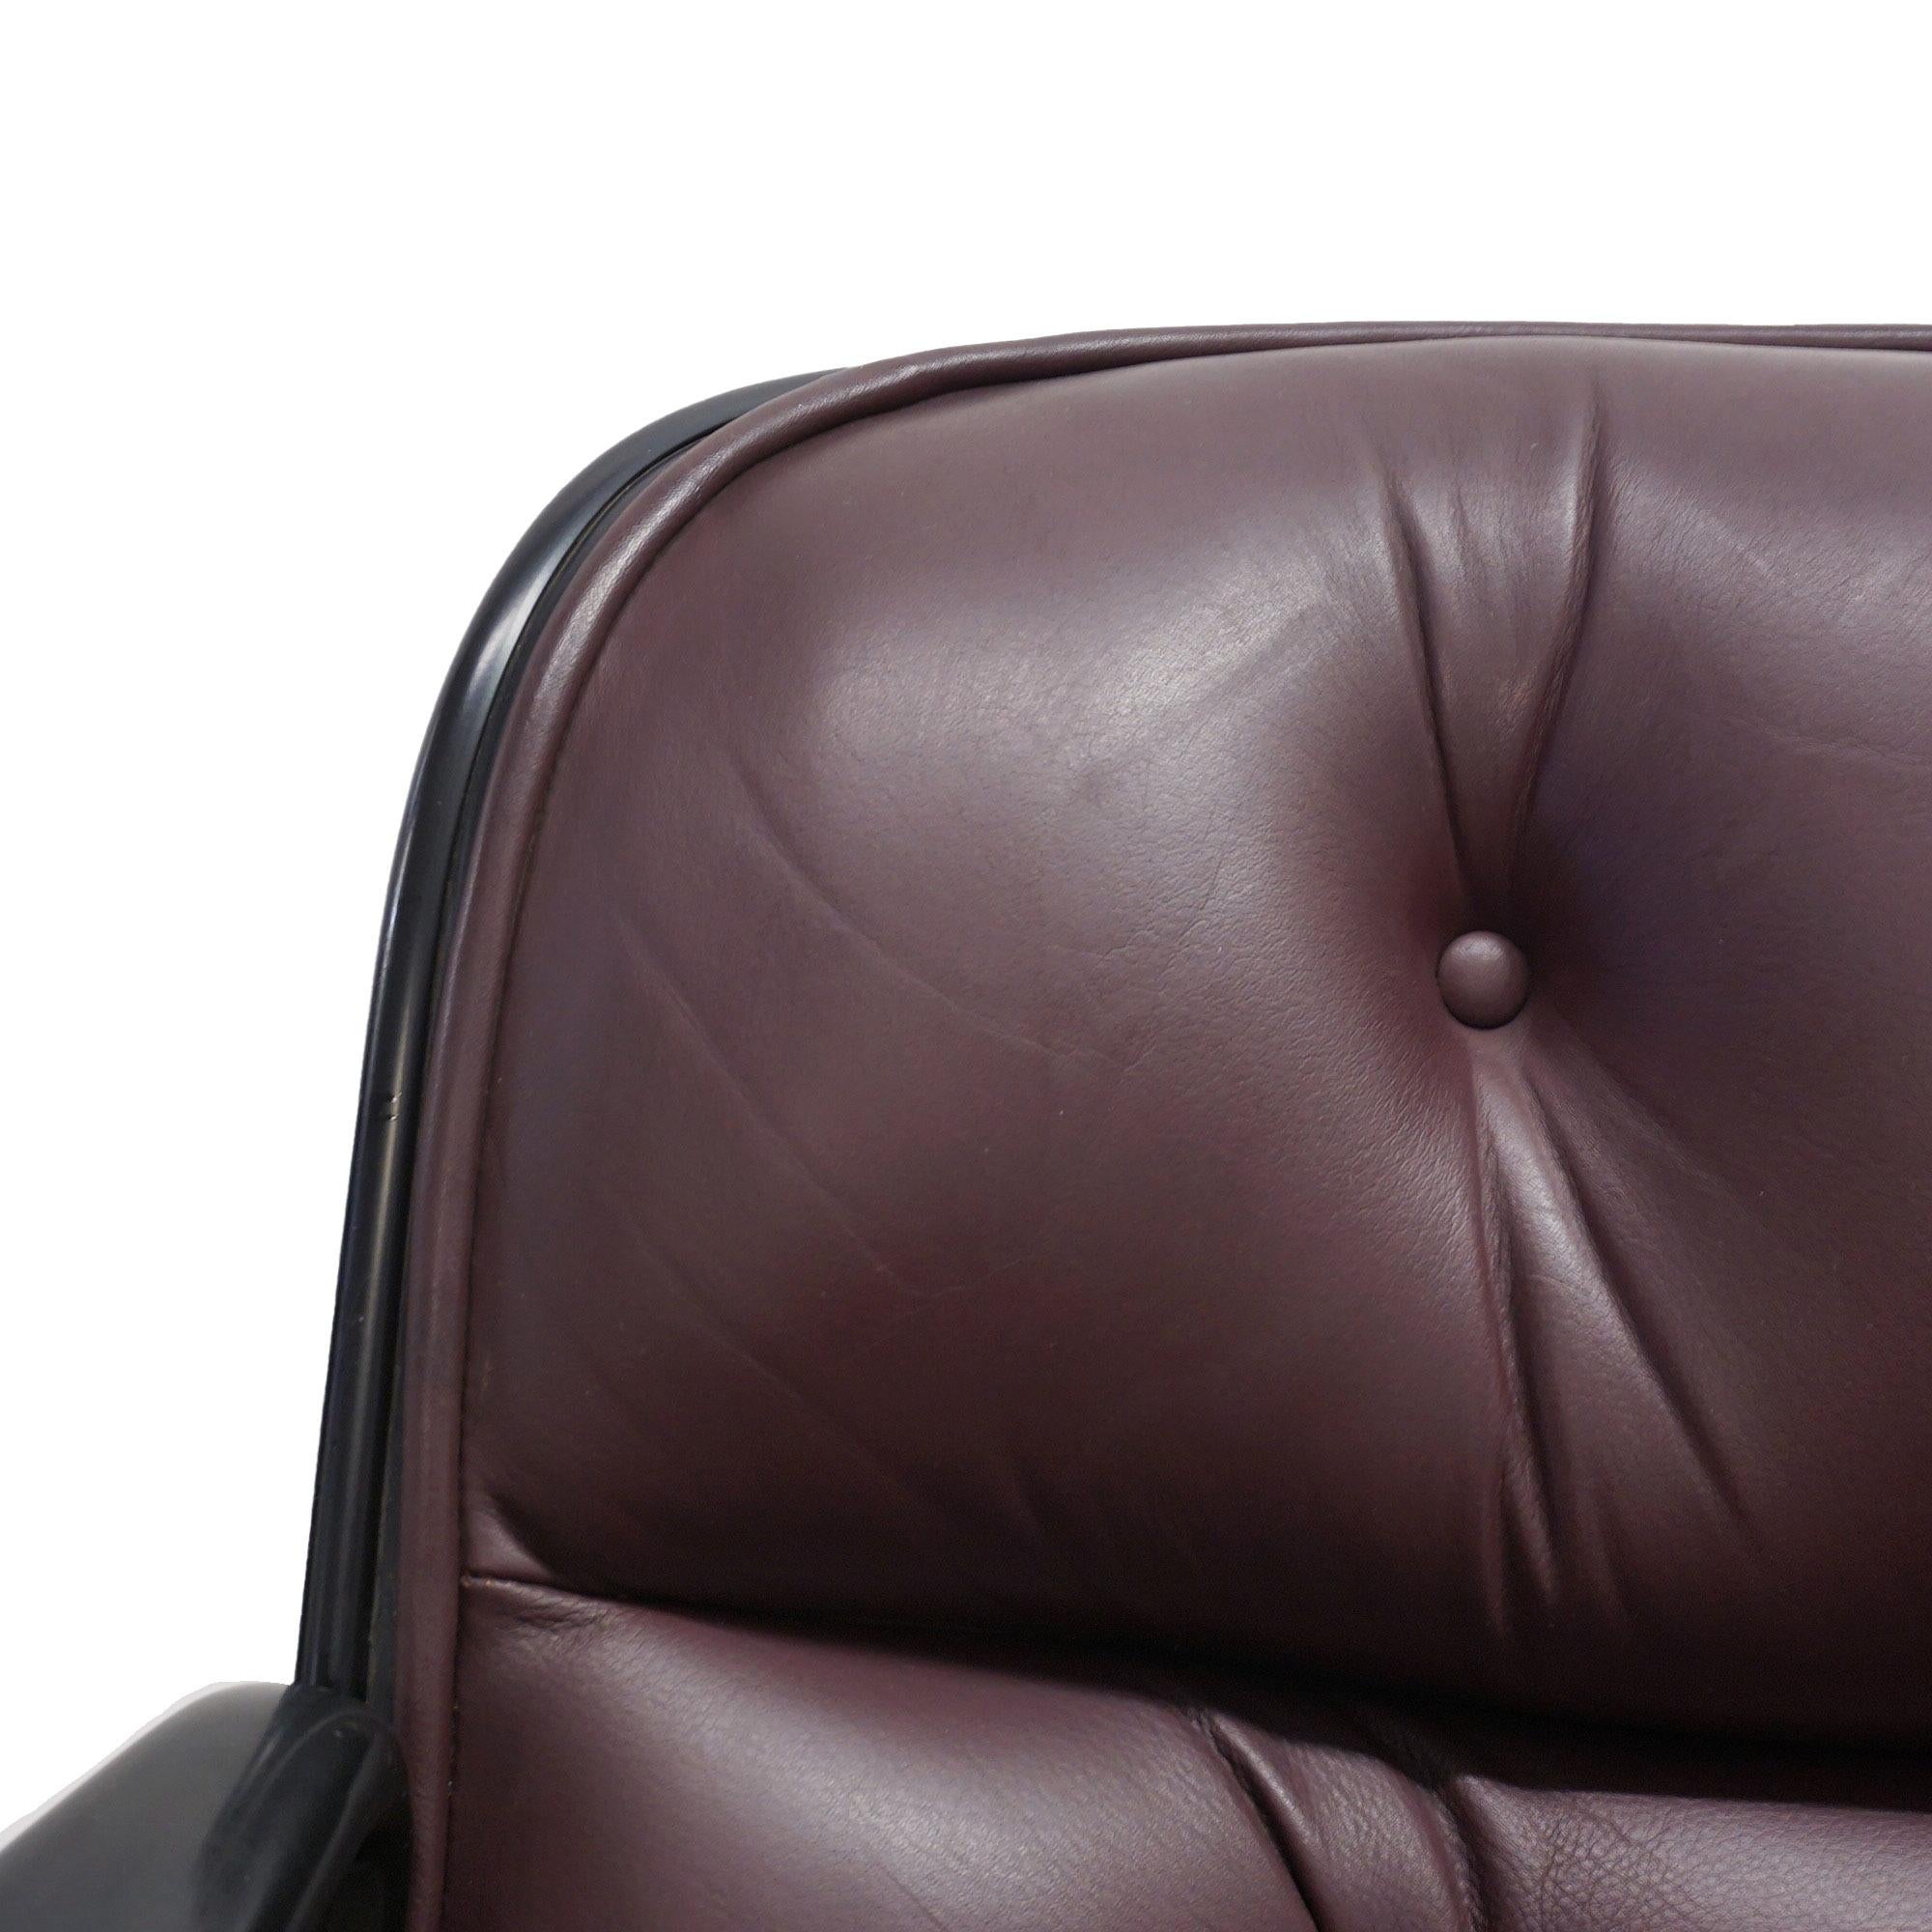 Late 20th Century Knoll Pollock Executive Chair in Aubergine Leather, Matte Black Frame For Sale